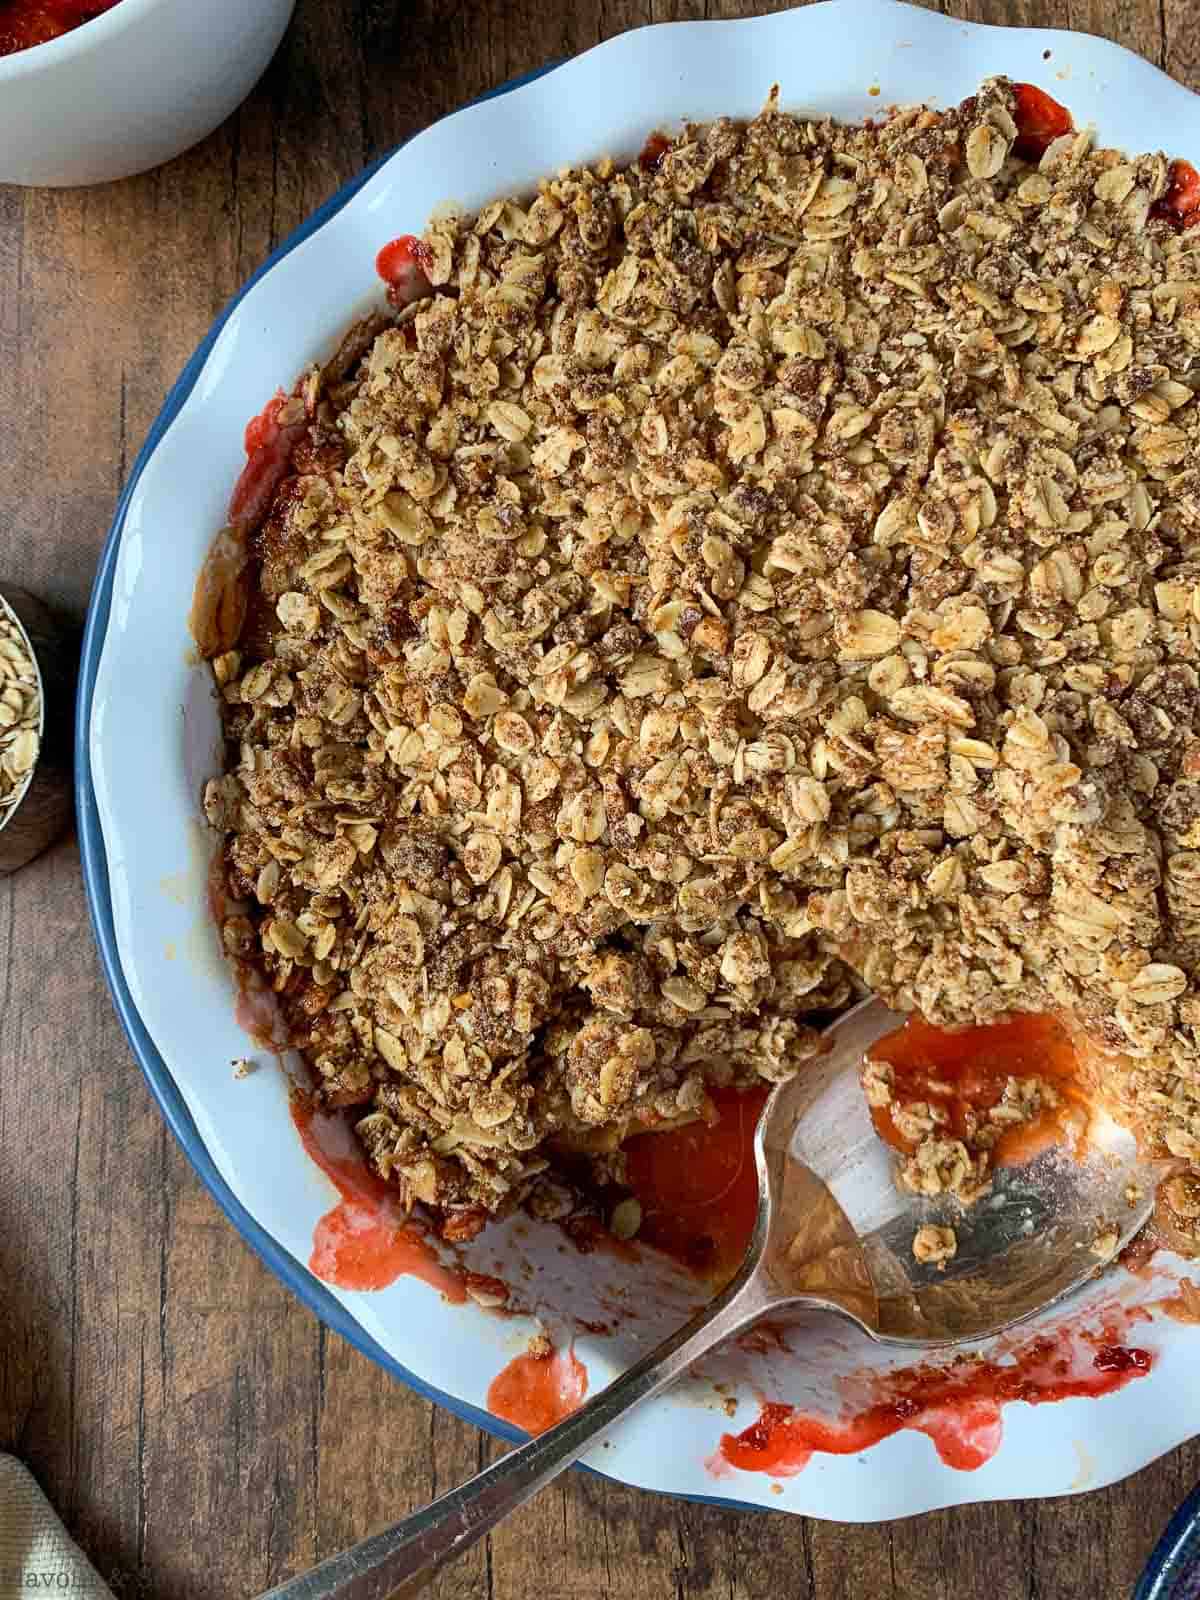 strawberry rhubarb crisp in a baking dish with a spoon